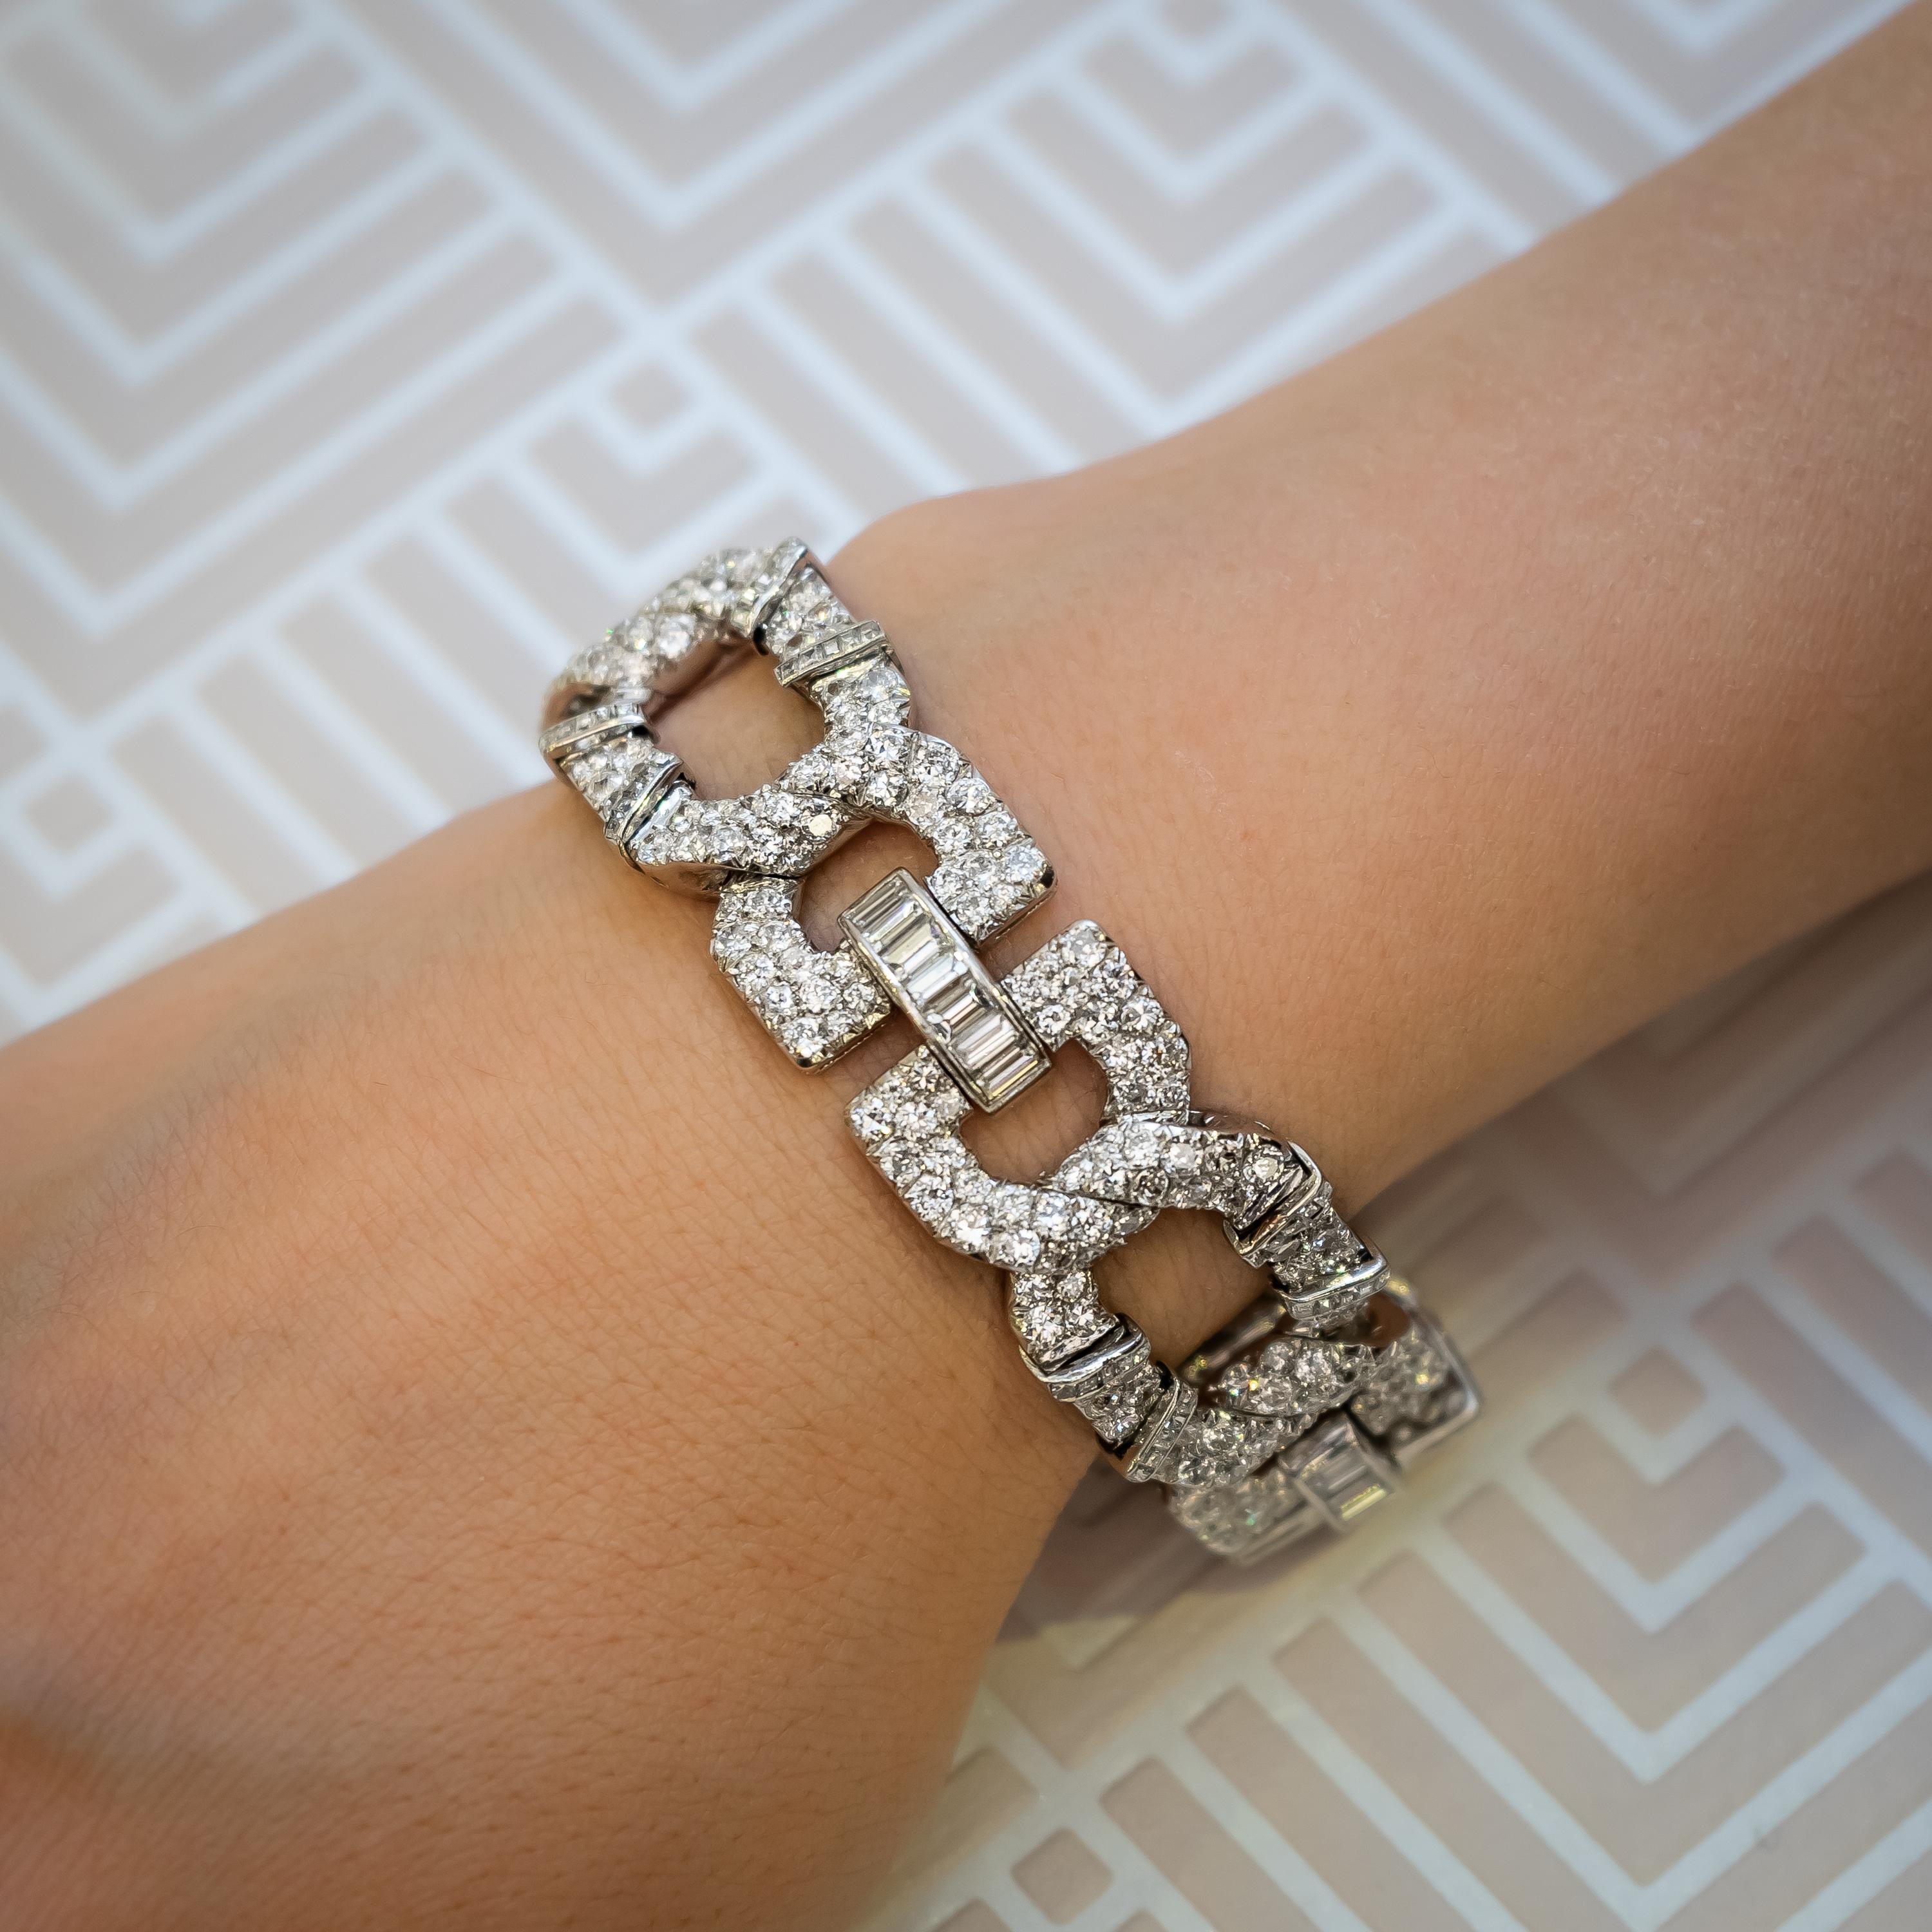 An Art Deco diamond bracelet by Cartier, mounted in platinum, pavé set with round brilliant-cut, old-cut, square-cut and baguette-cut diamonds, with a hinged clasp set with baguette-cut diamonds. Signed and numbered, with a French dog mark, for